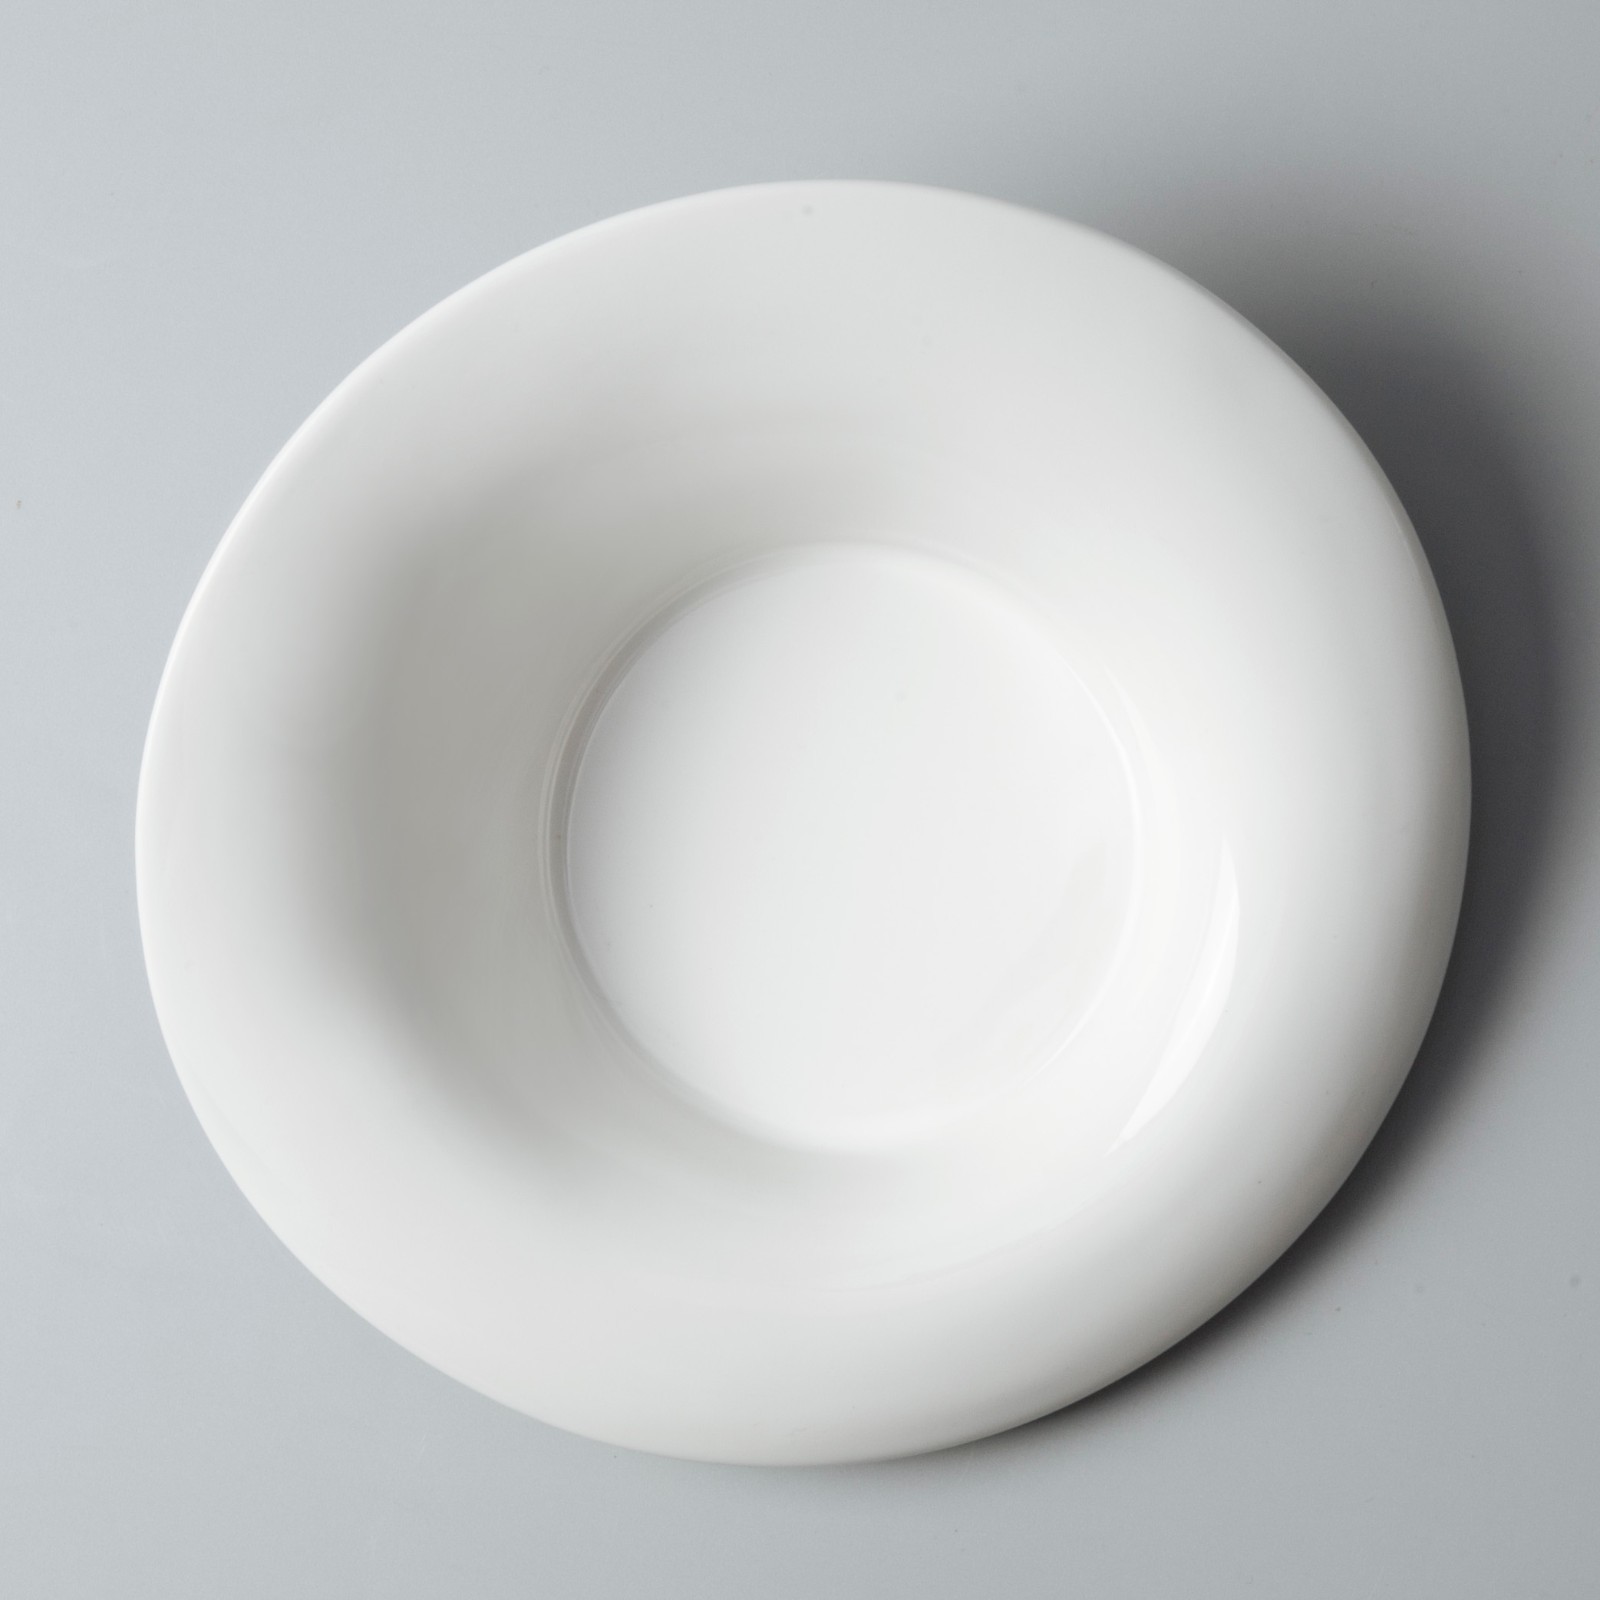 contemporary hotel crockery online india German style series for dinner